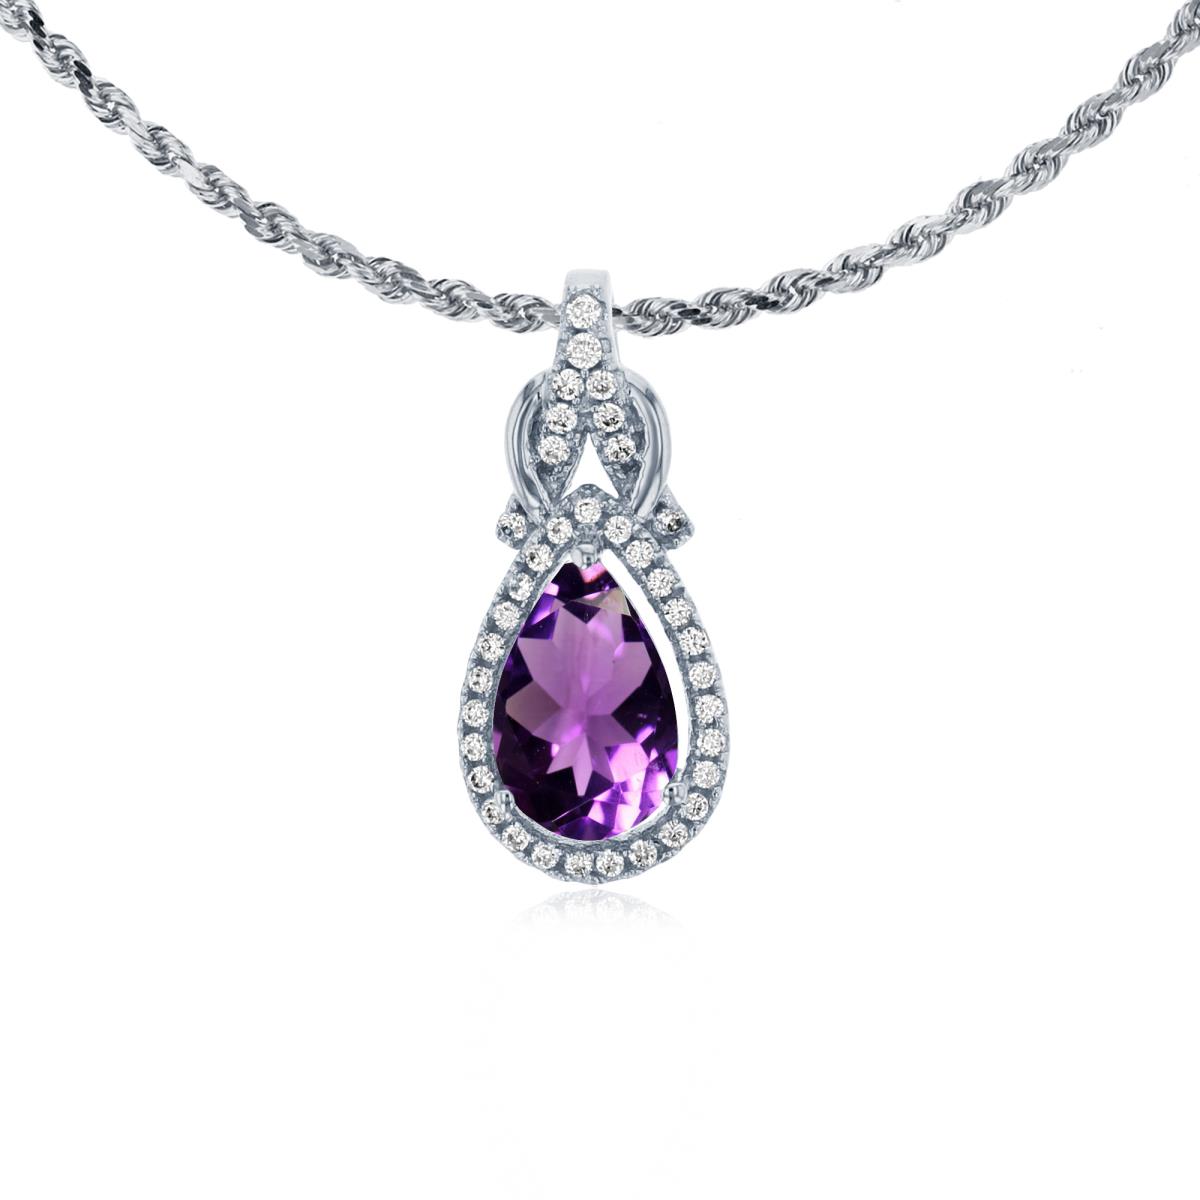 10K White Gold 8x5mm Pear Cut Amethyst & 0.11 CTTW Rnd Diamond Knot 18" Rope Chain Necklace